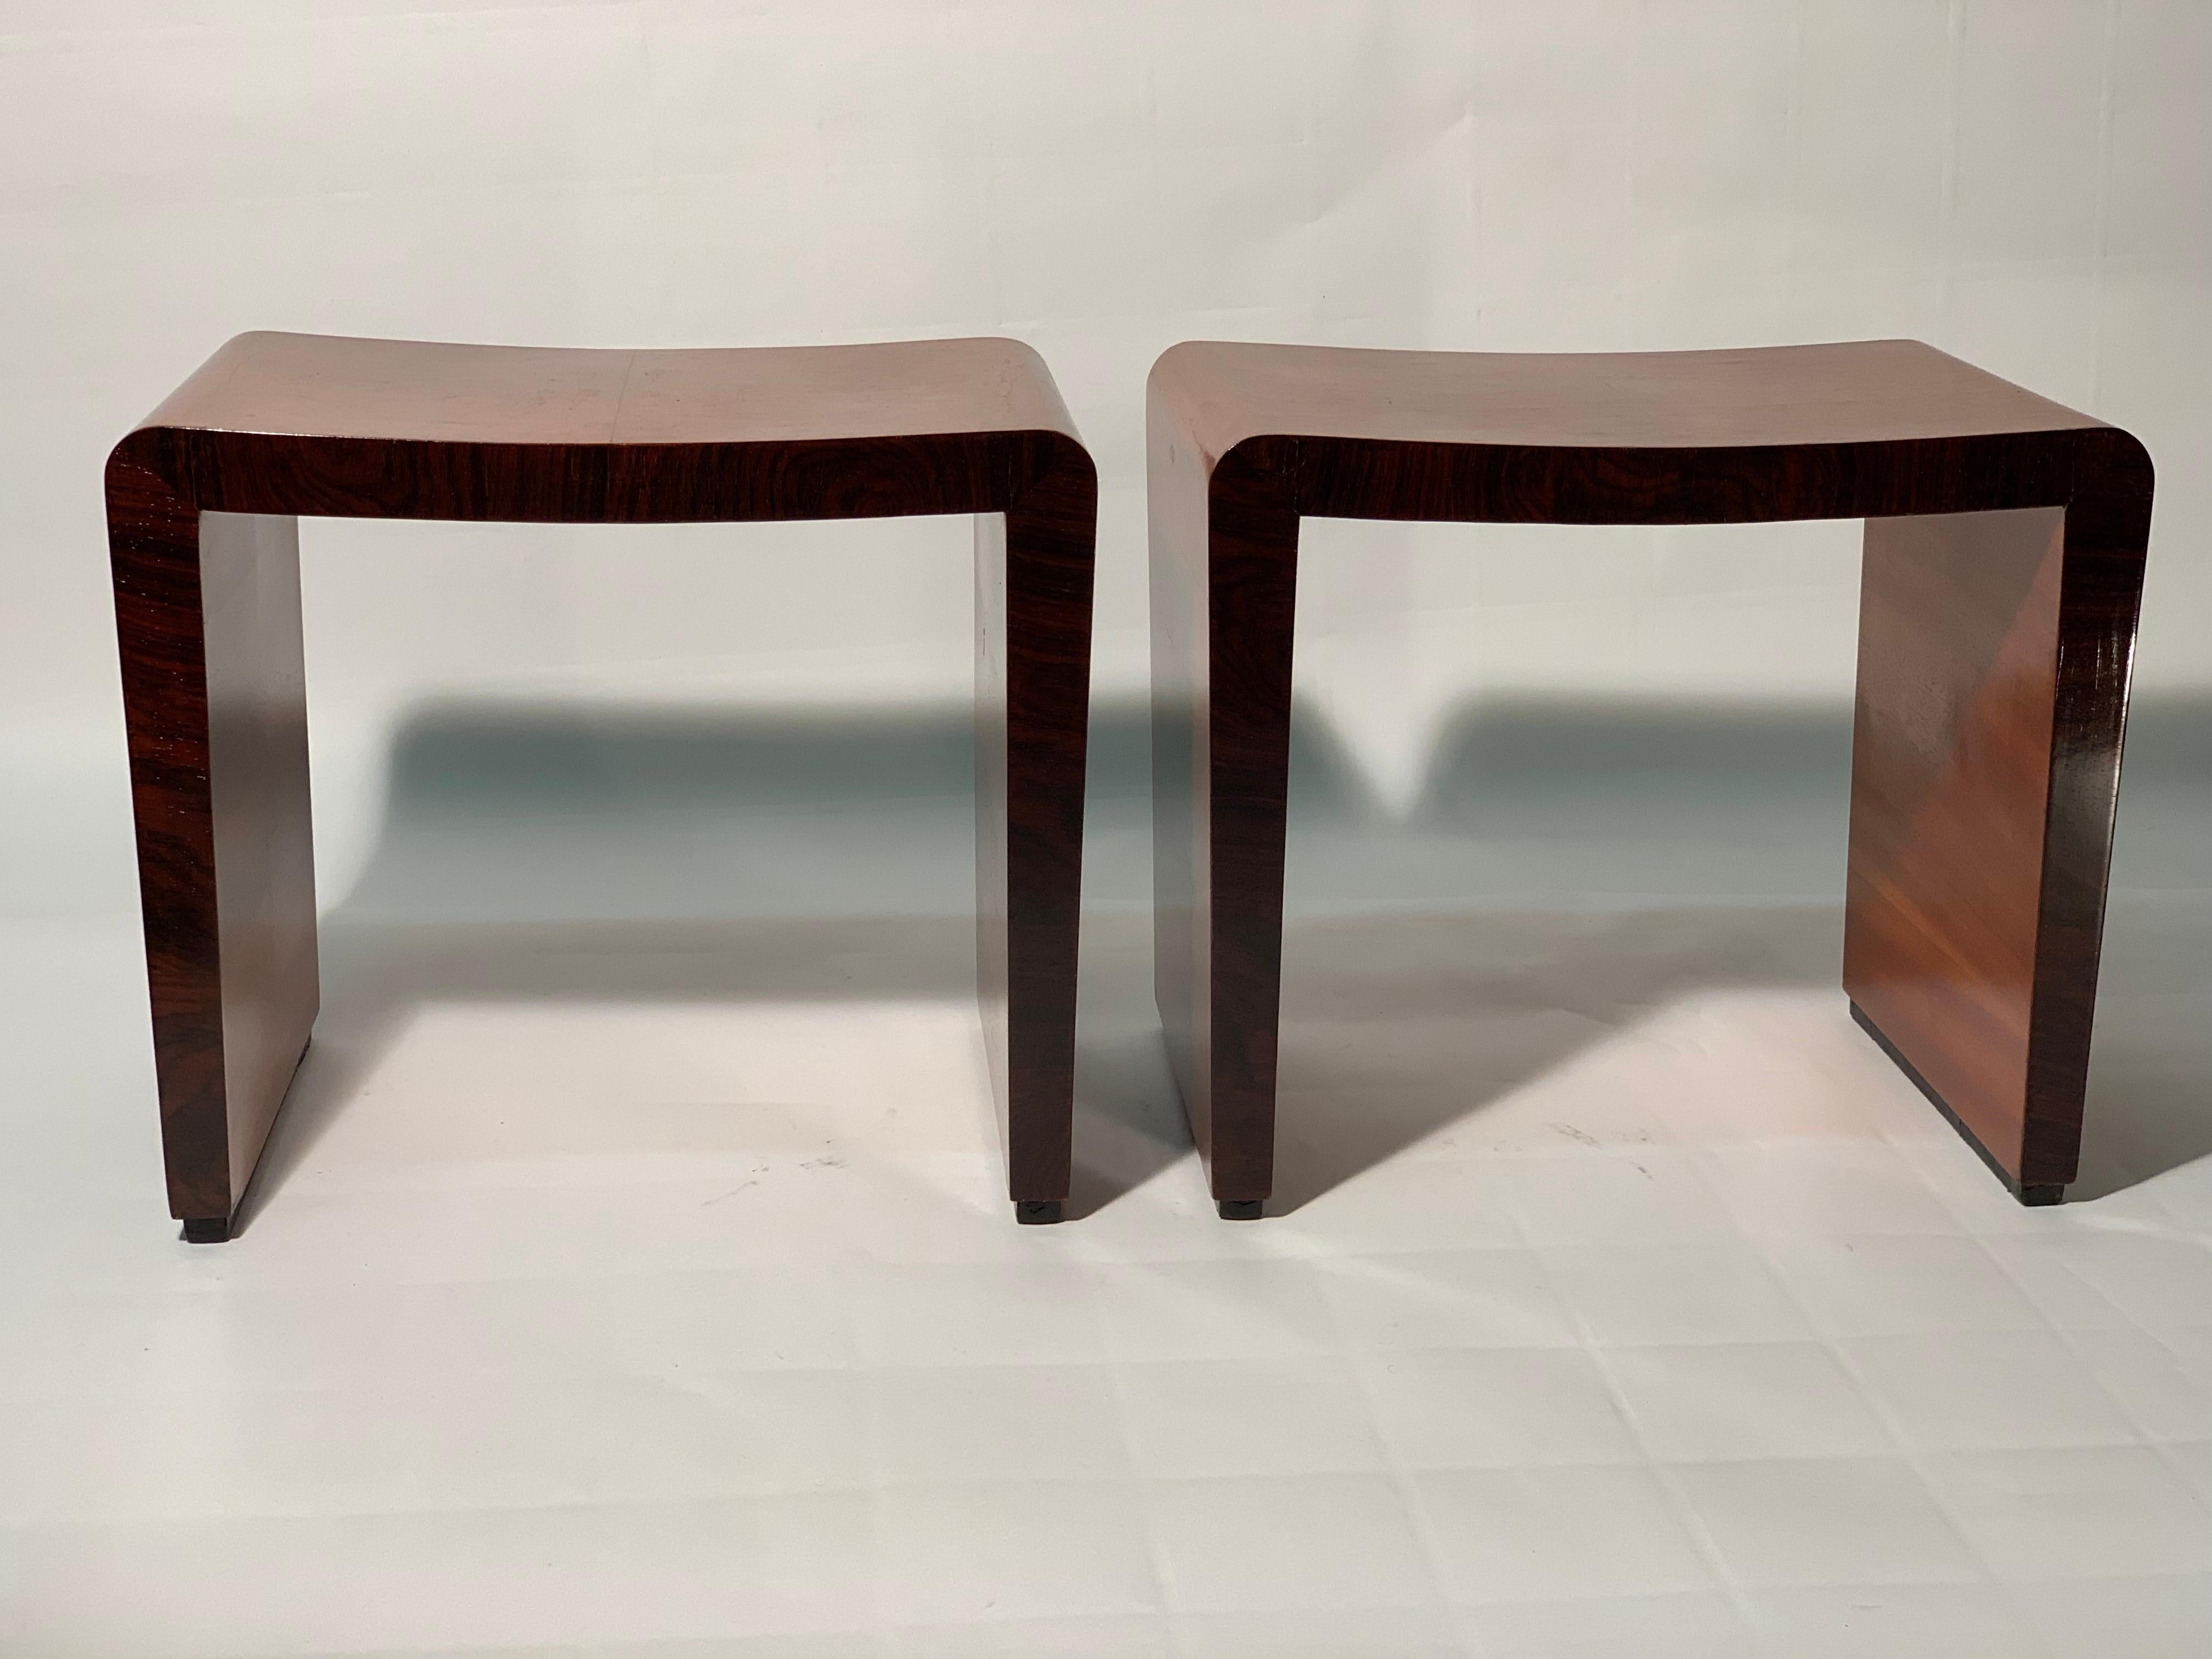 Italian elegant 1930s Art deco pair of U-shaped upside-down stools built with a beautiful walnut root and edged on the front with precious dark exotic wood.
Meroni and Fossati Italy, 1930s midcentury.
   